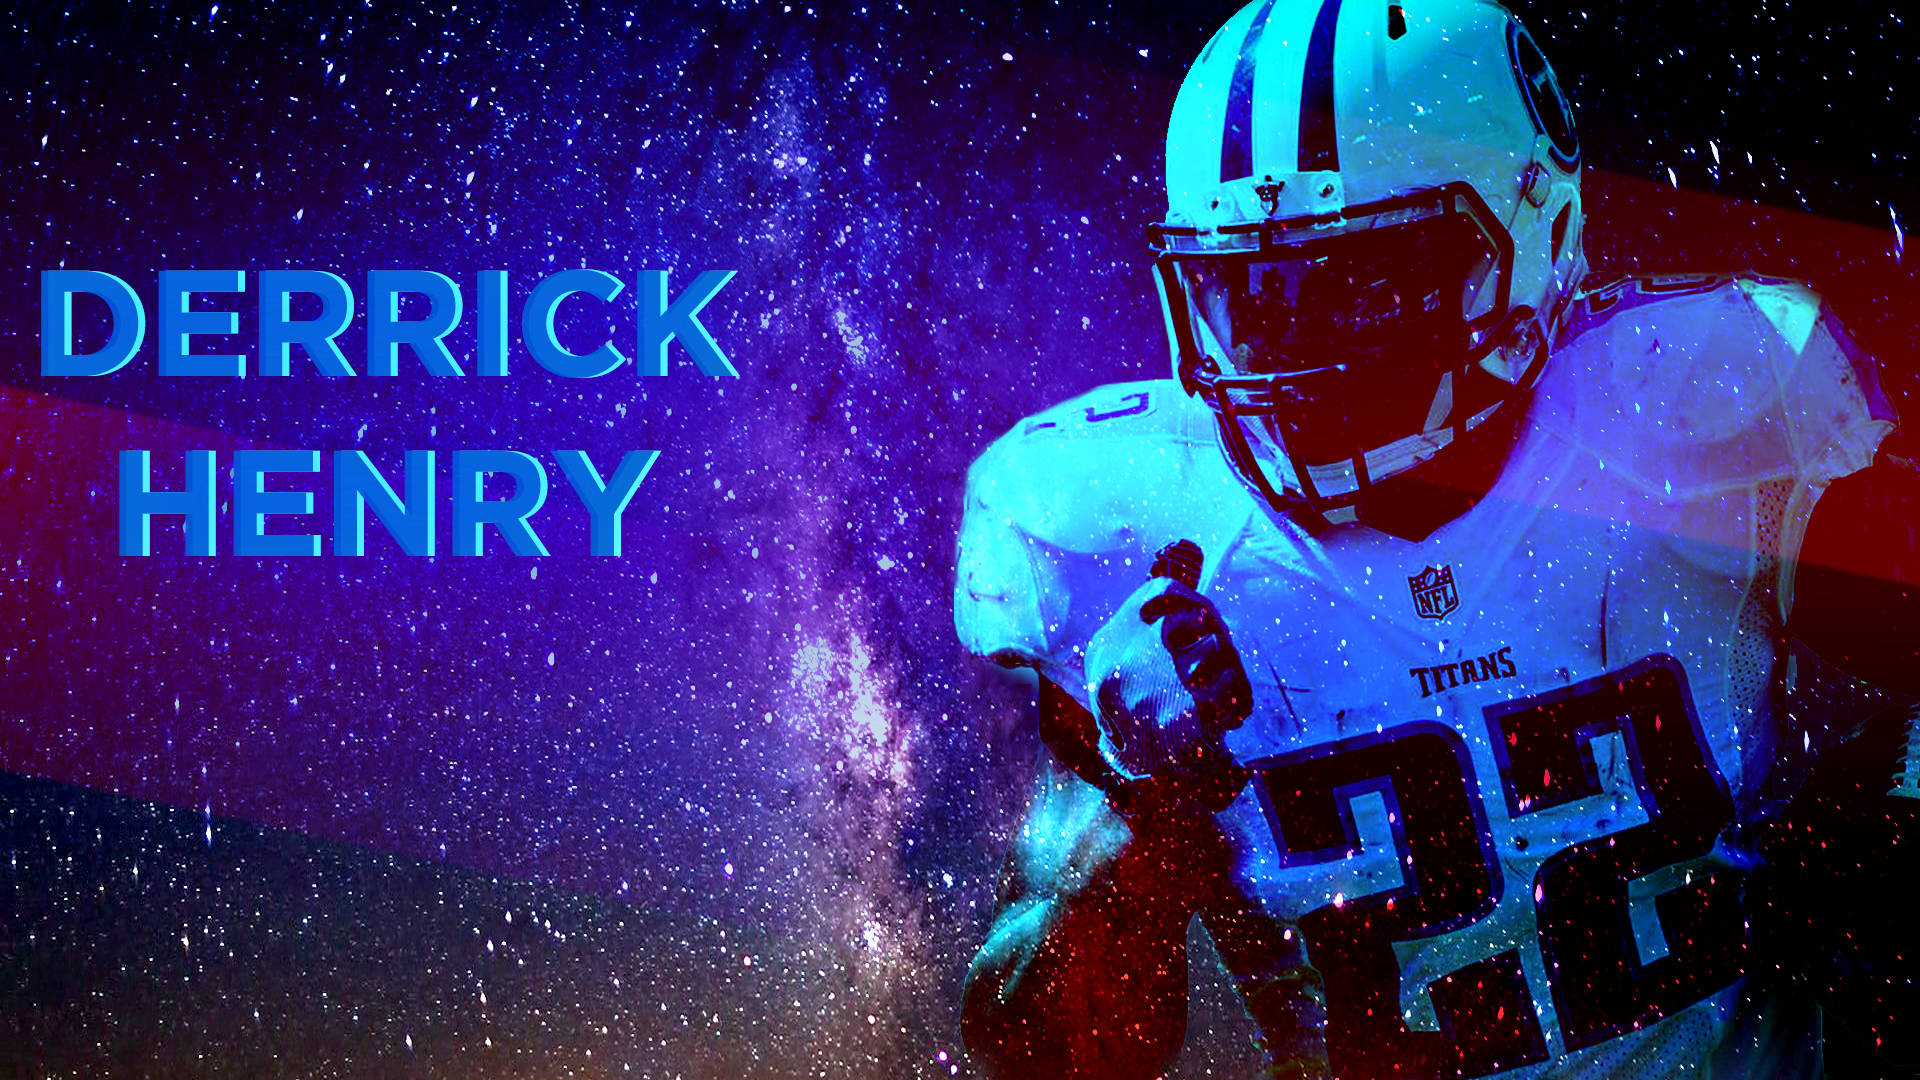 Galactic Derrick Henry Poster Background